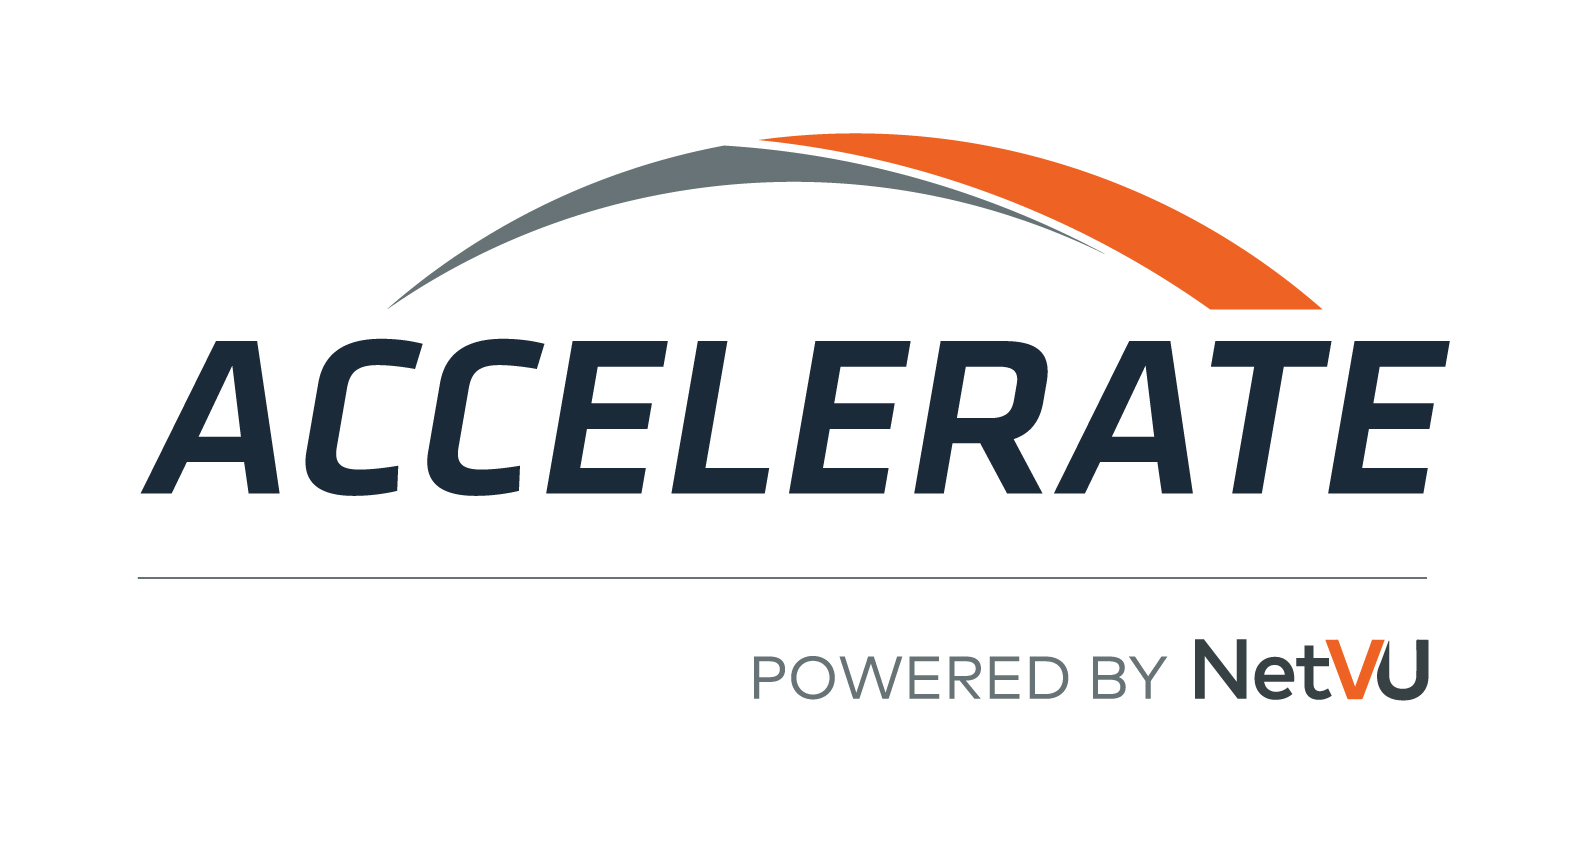 https://www.netvu.org/WEB/images/Accelerate/NetVU-Accelerate-Conference-logo_final-with-tag.jpg